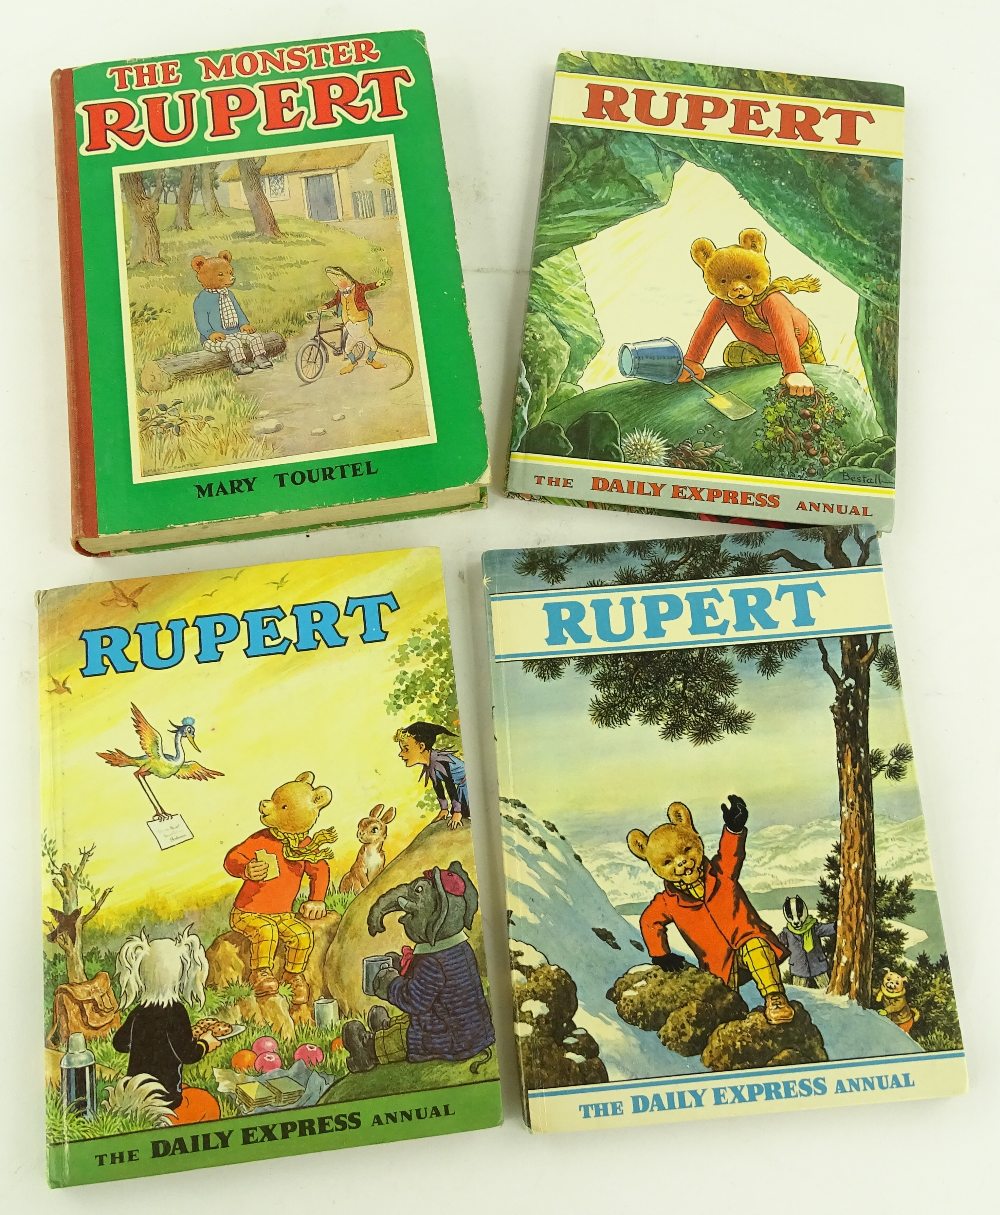 The Monster Rupert 1948 by Mary Tourtel and 3 othe